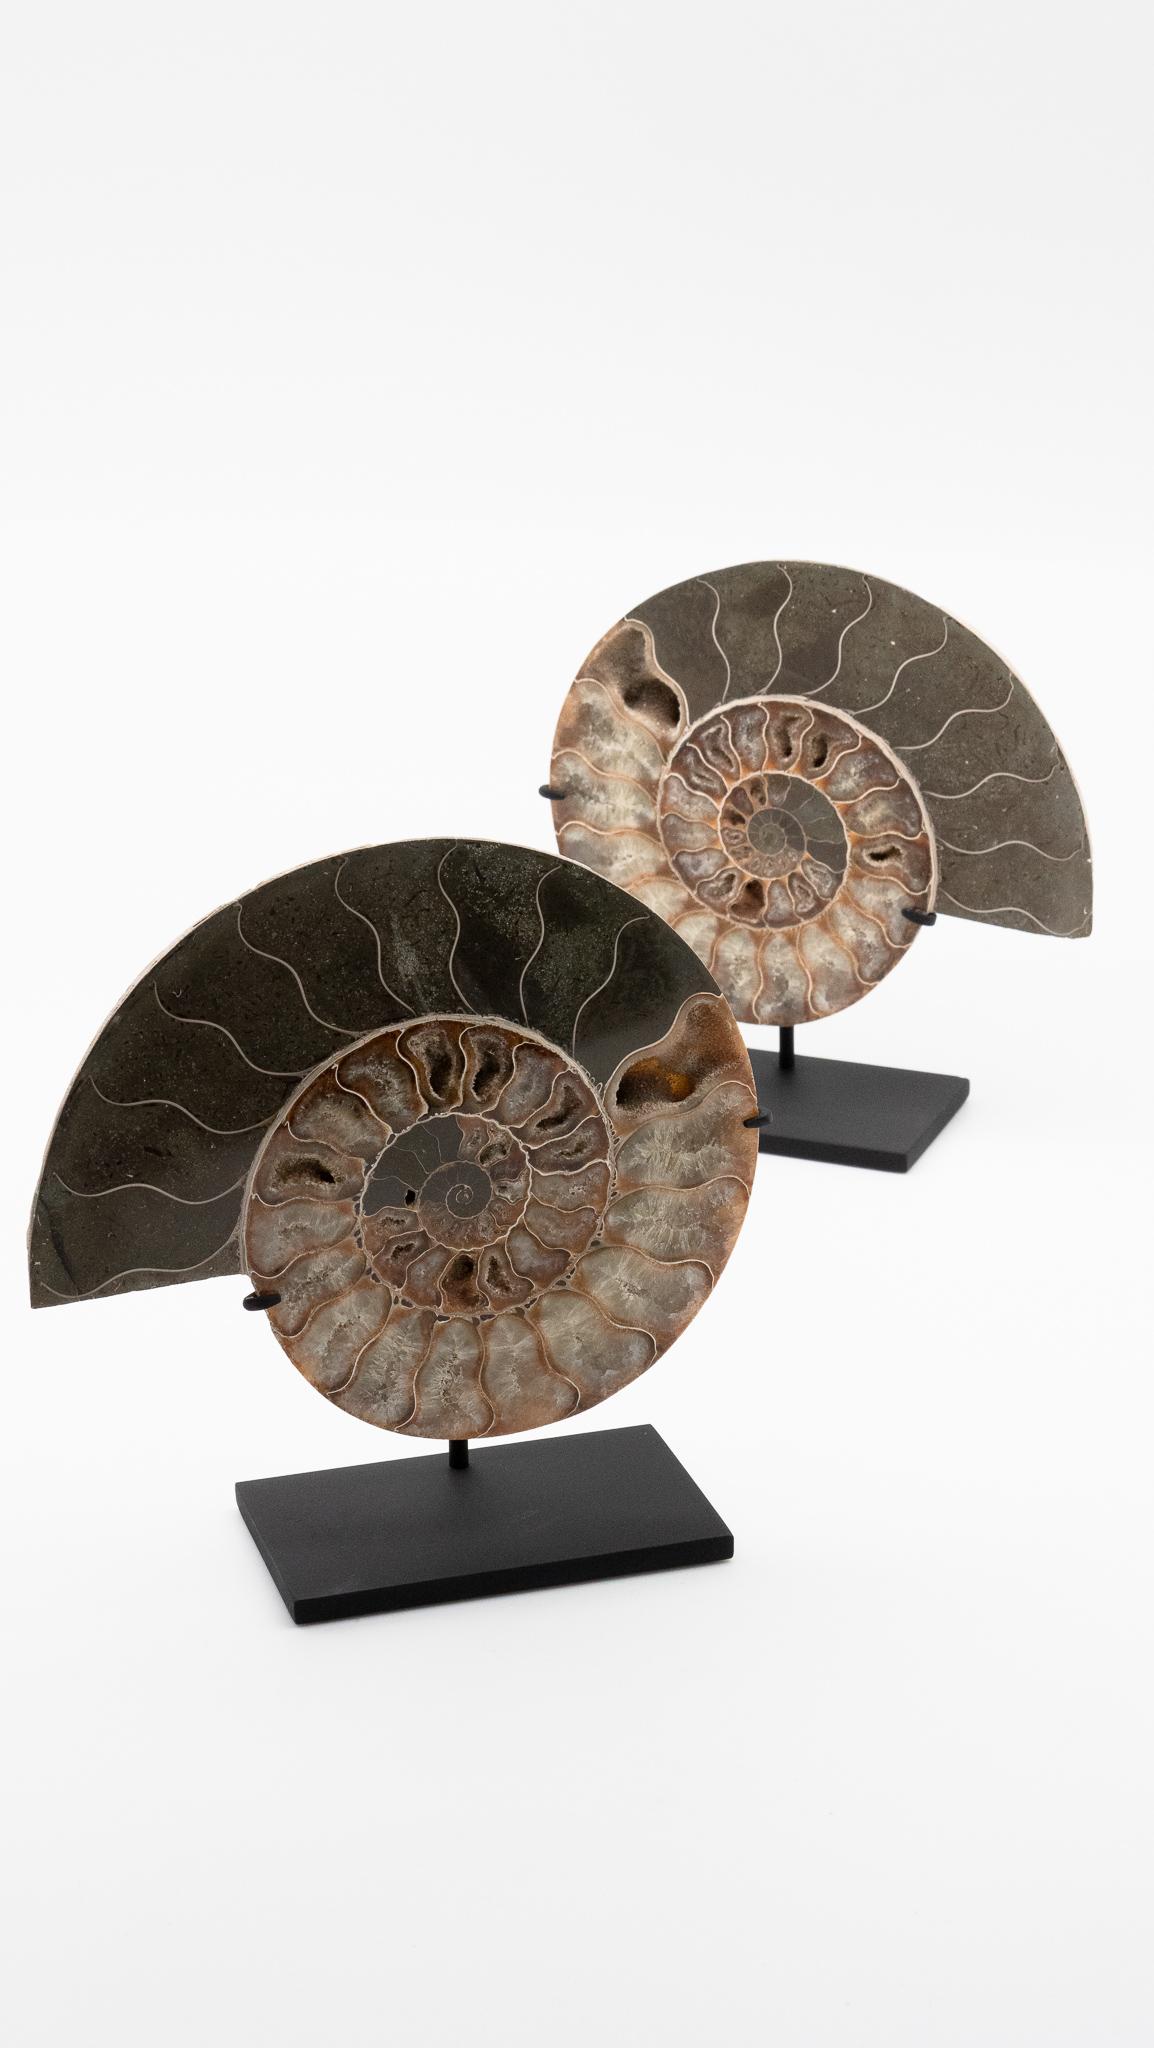 Fossilized ammonite slices mounted on black metal bases. 

Ammonoids are an extinct group of marine mollusk animals closely related to octopuses, squid, and cuttlefish. The name 